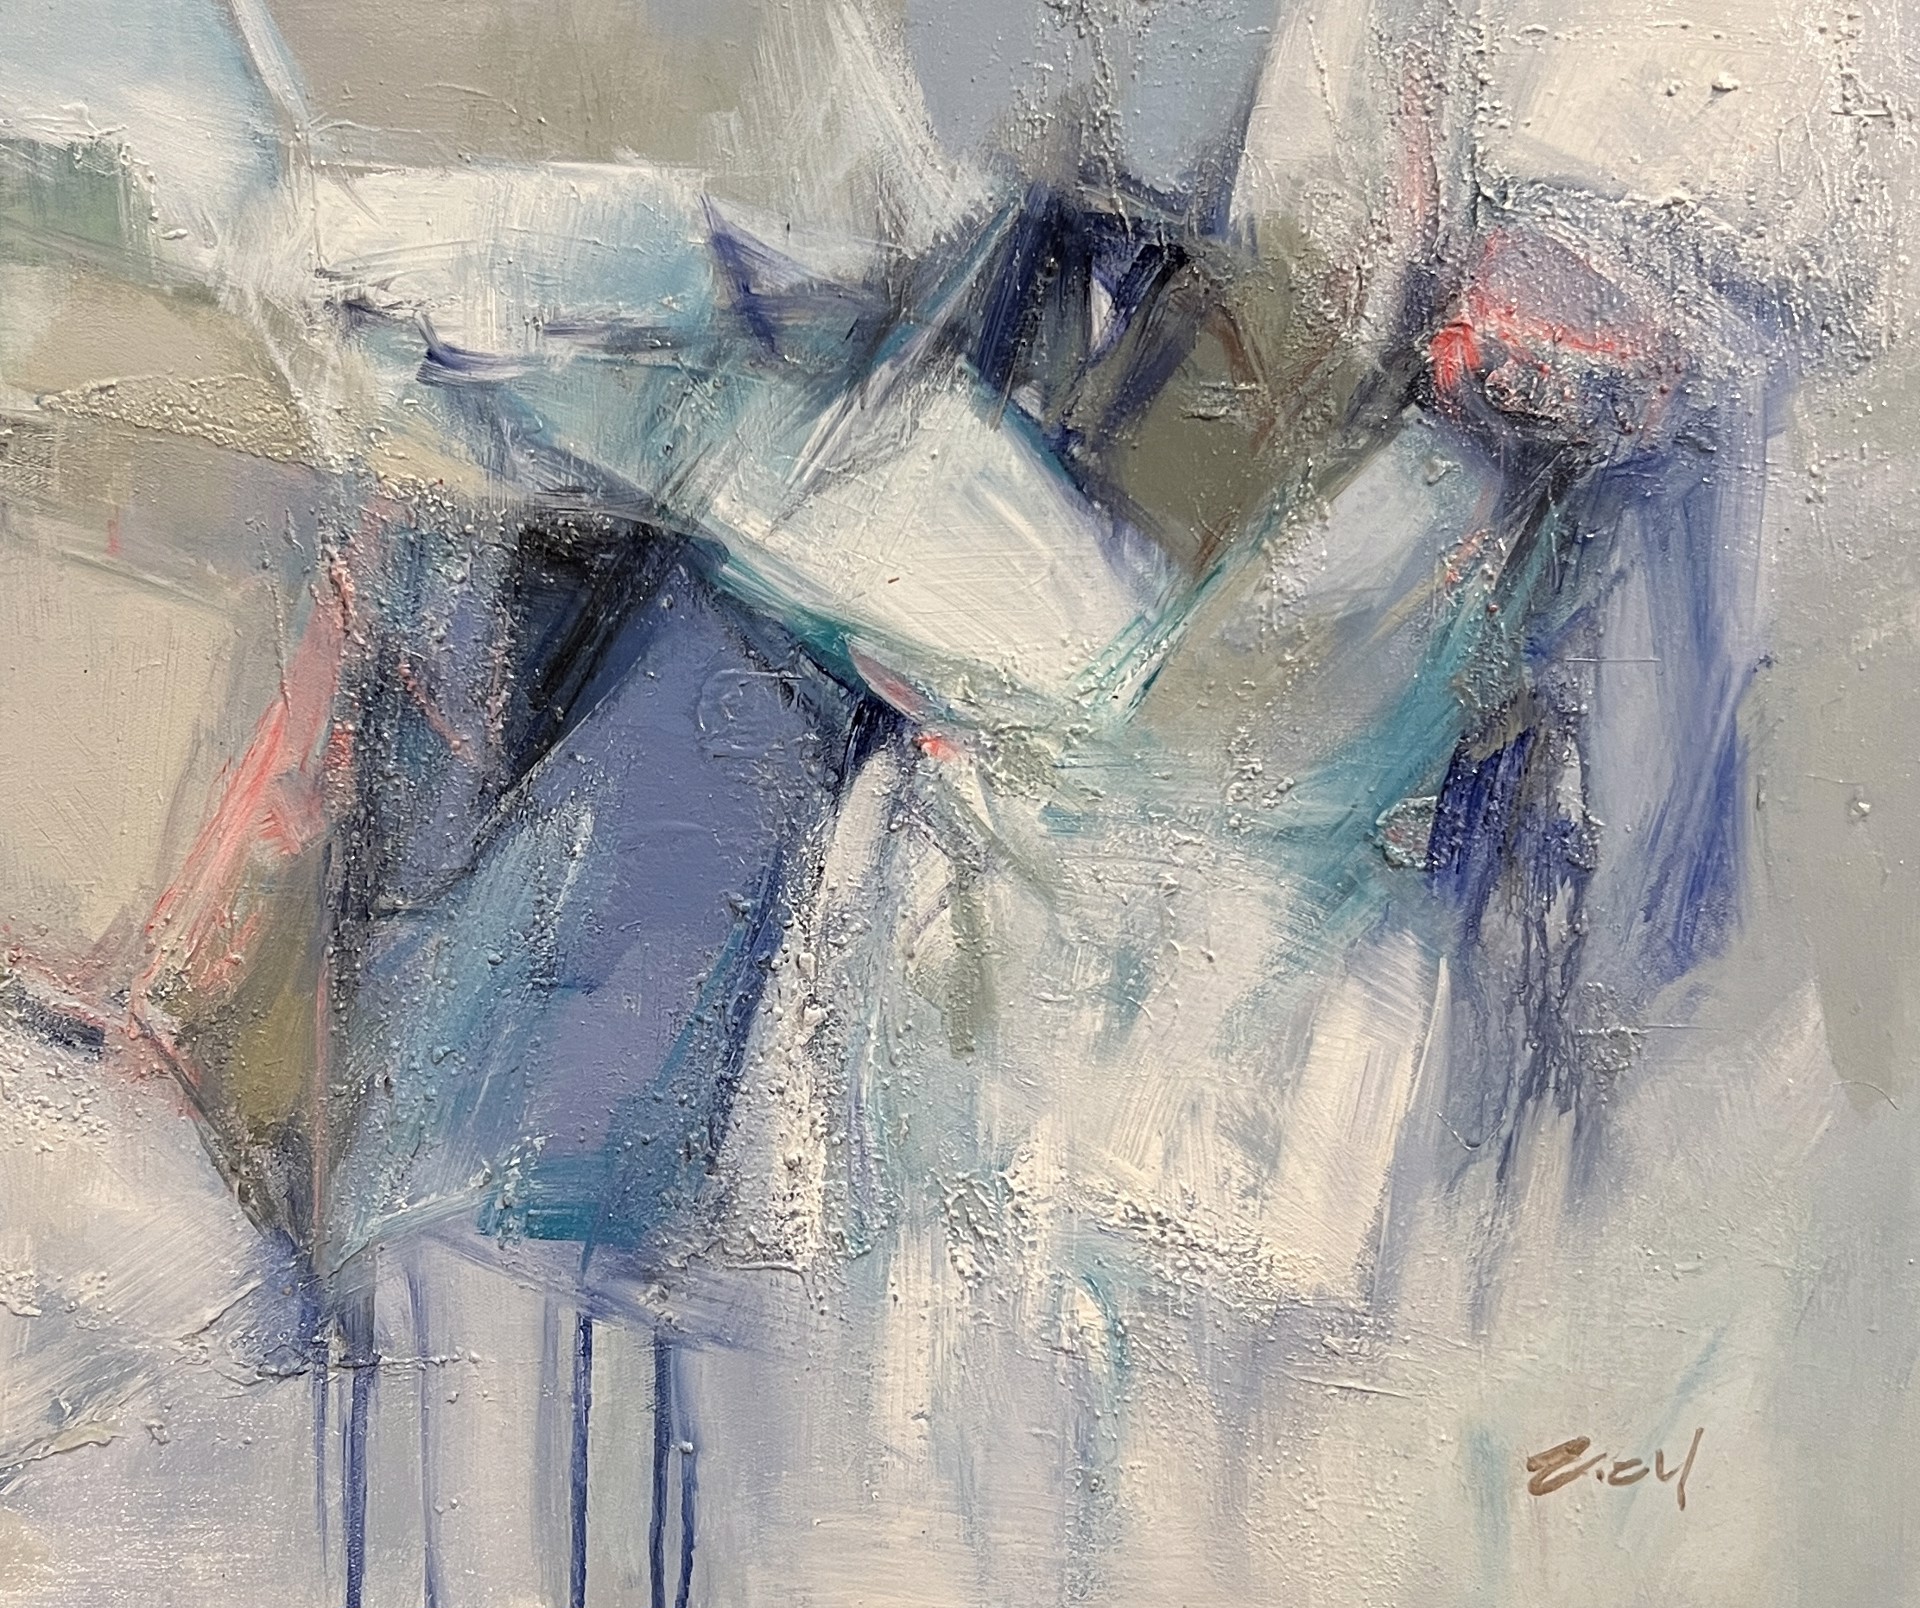 ABSTRACT IN LIGHT BLUE by VARIOUS WORKS